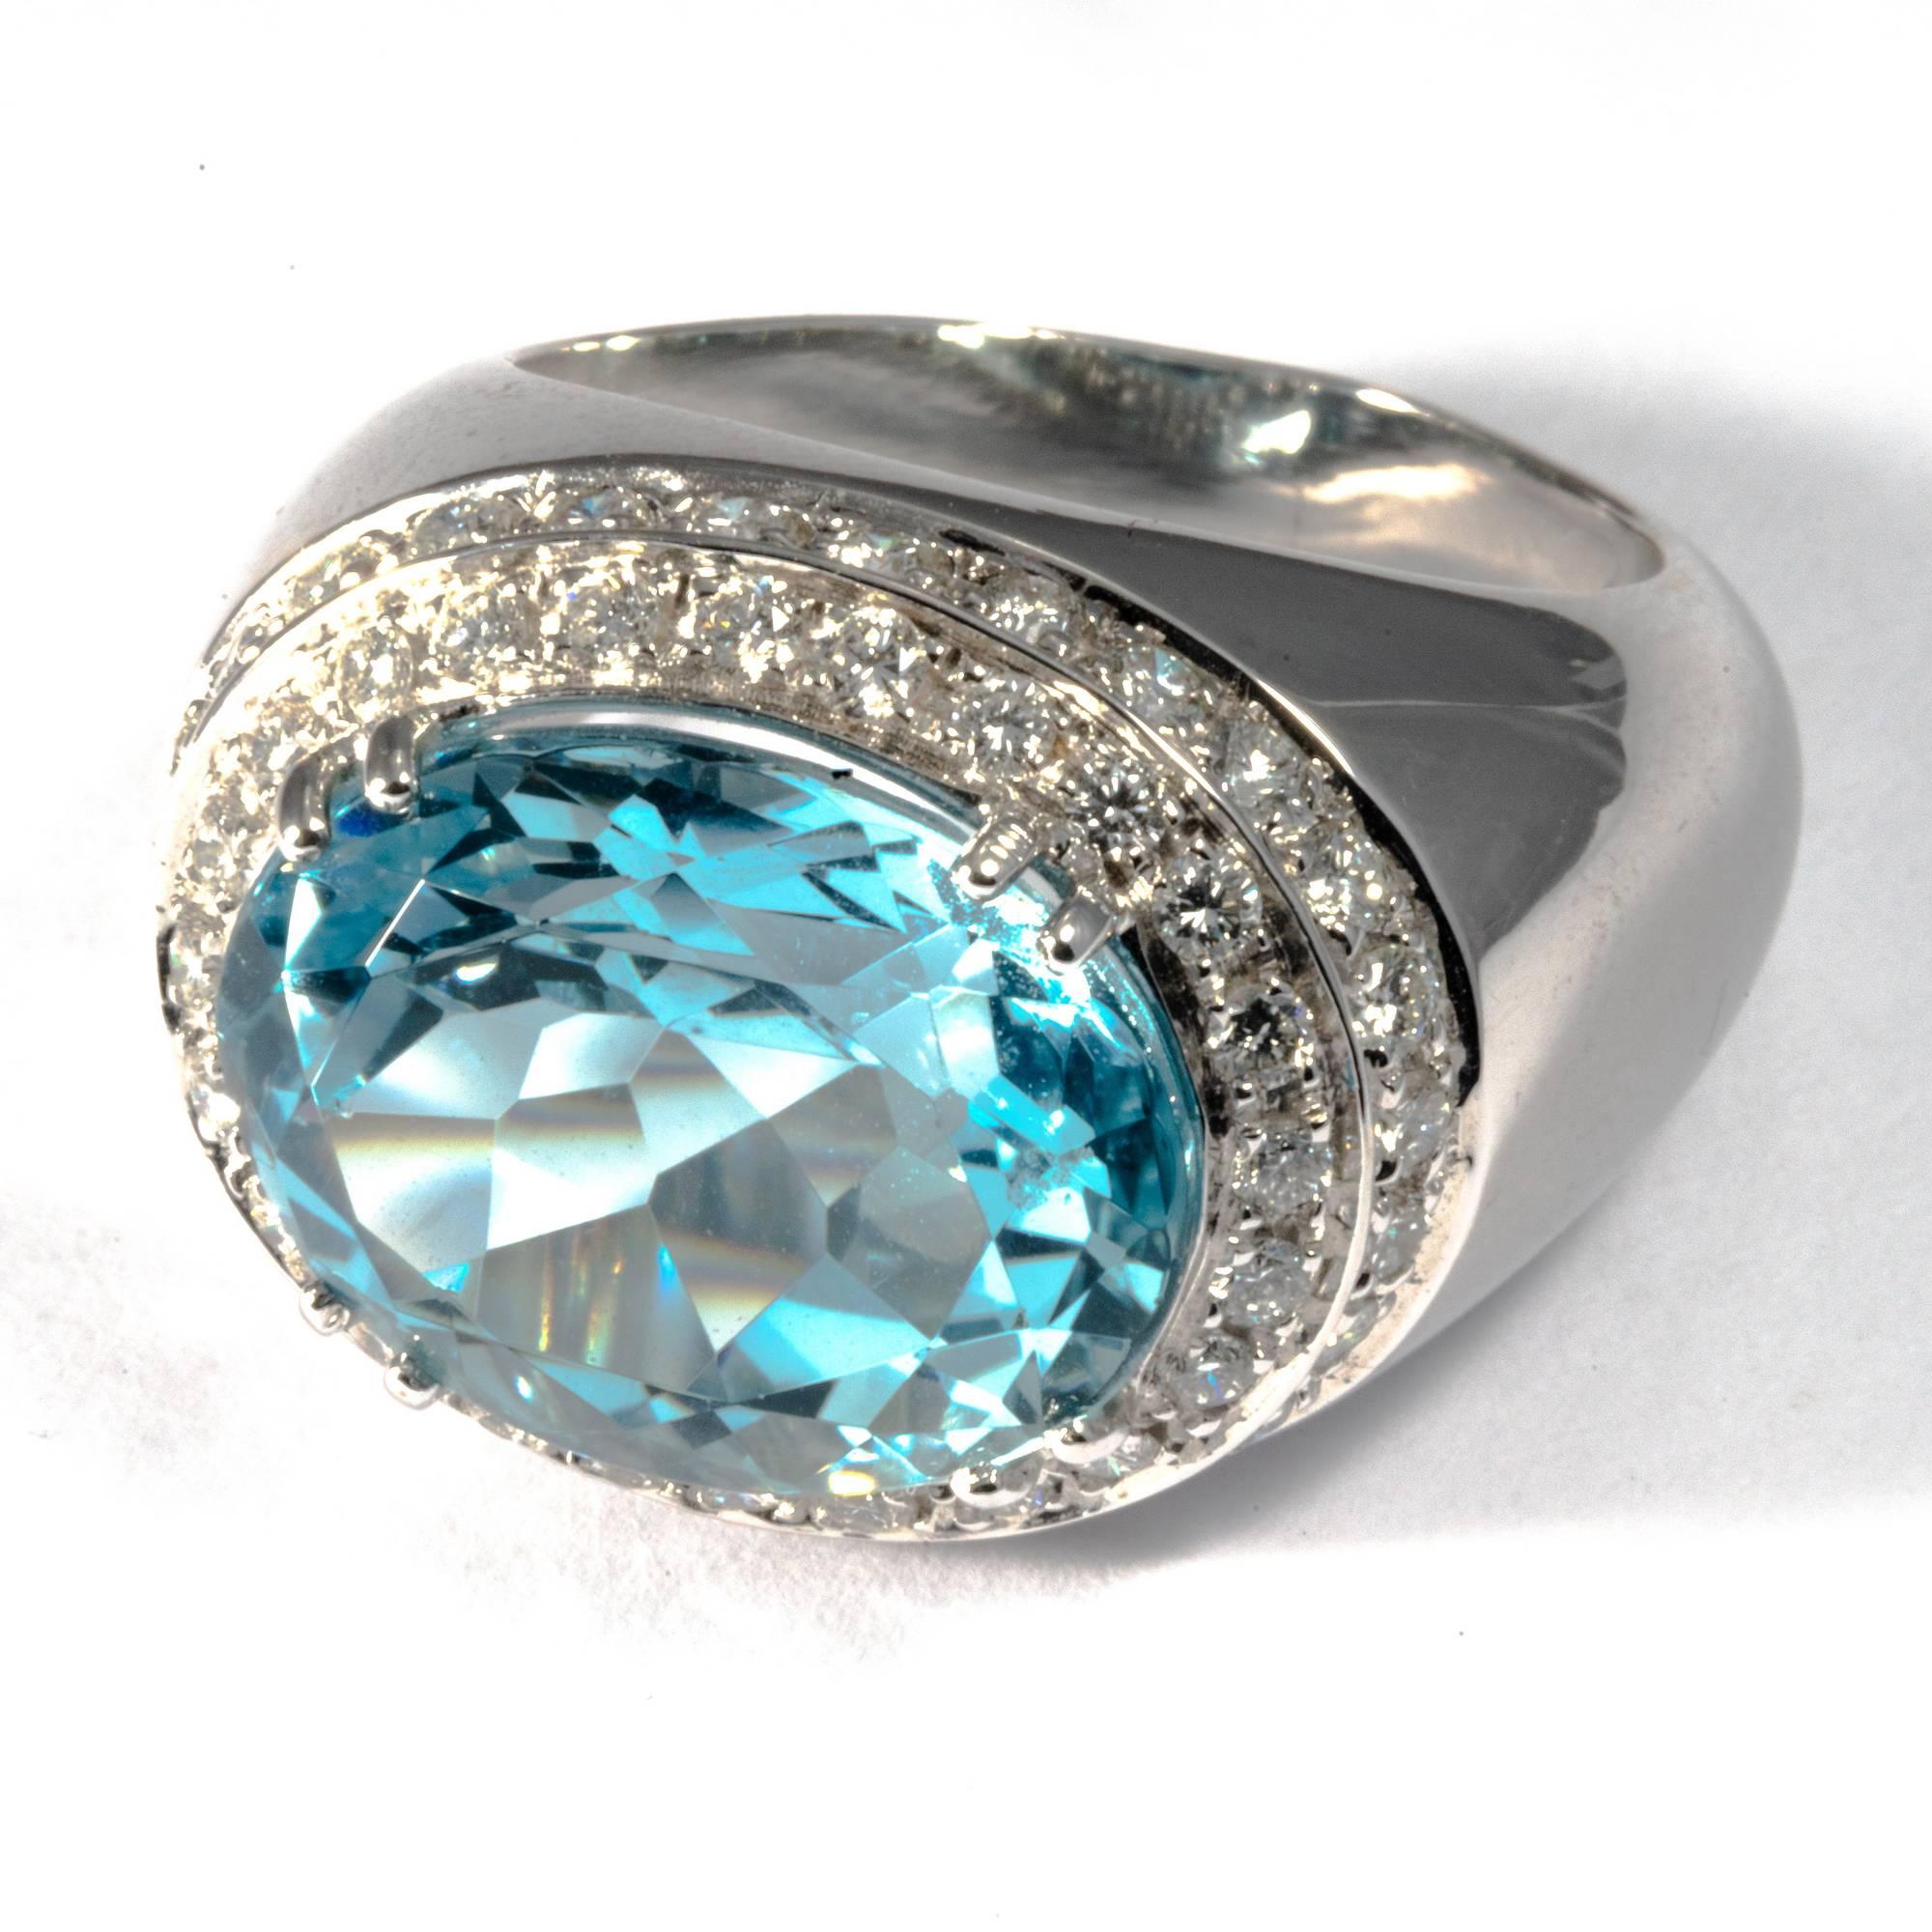 This stunning and mesmerizing large white gold cocktail ring will turn everybody's head! Elegant and playful,   it's lavish design puts the emphasis on the natural beauty of the gemstones. A rare vivid aquamarine of 10.10 carats sparkles at the